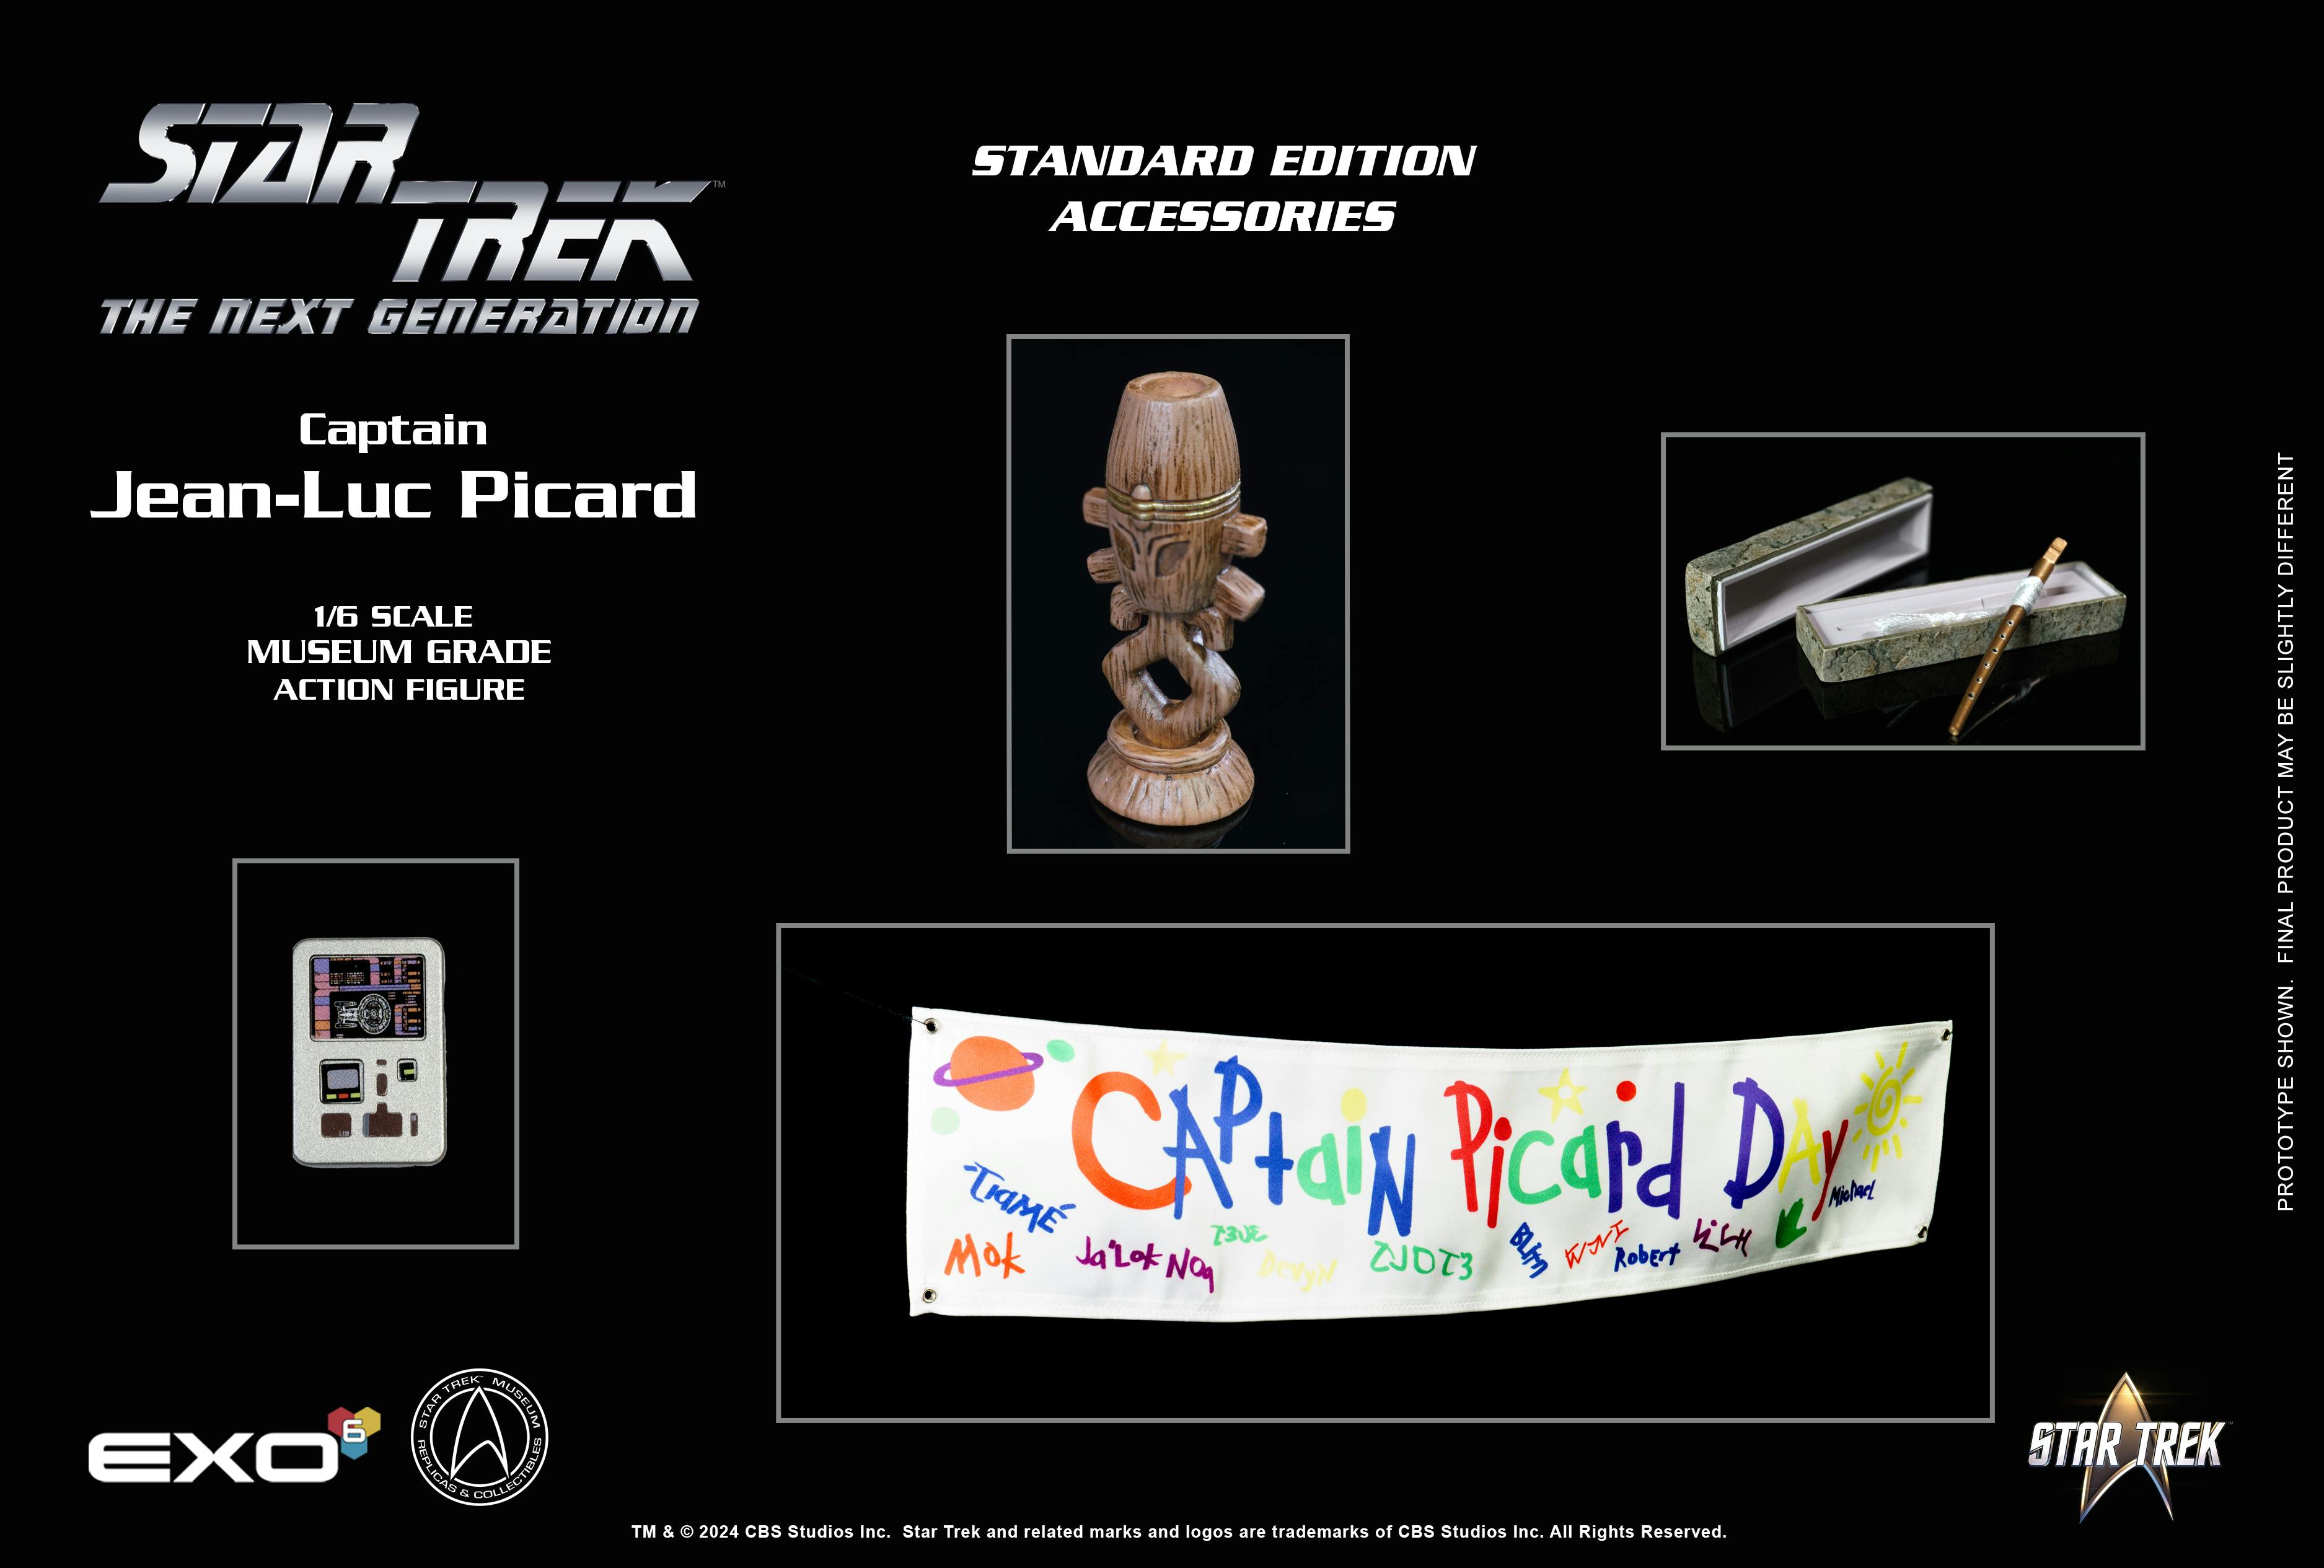 EXO-6 Star Trek: The Next Generation Captain Jean-Luc Picard Standard Edition Accessories include: PADD, Risian Horga’hn fertility idol, Ressikan flute, Captain Picard Day banner 